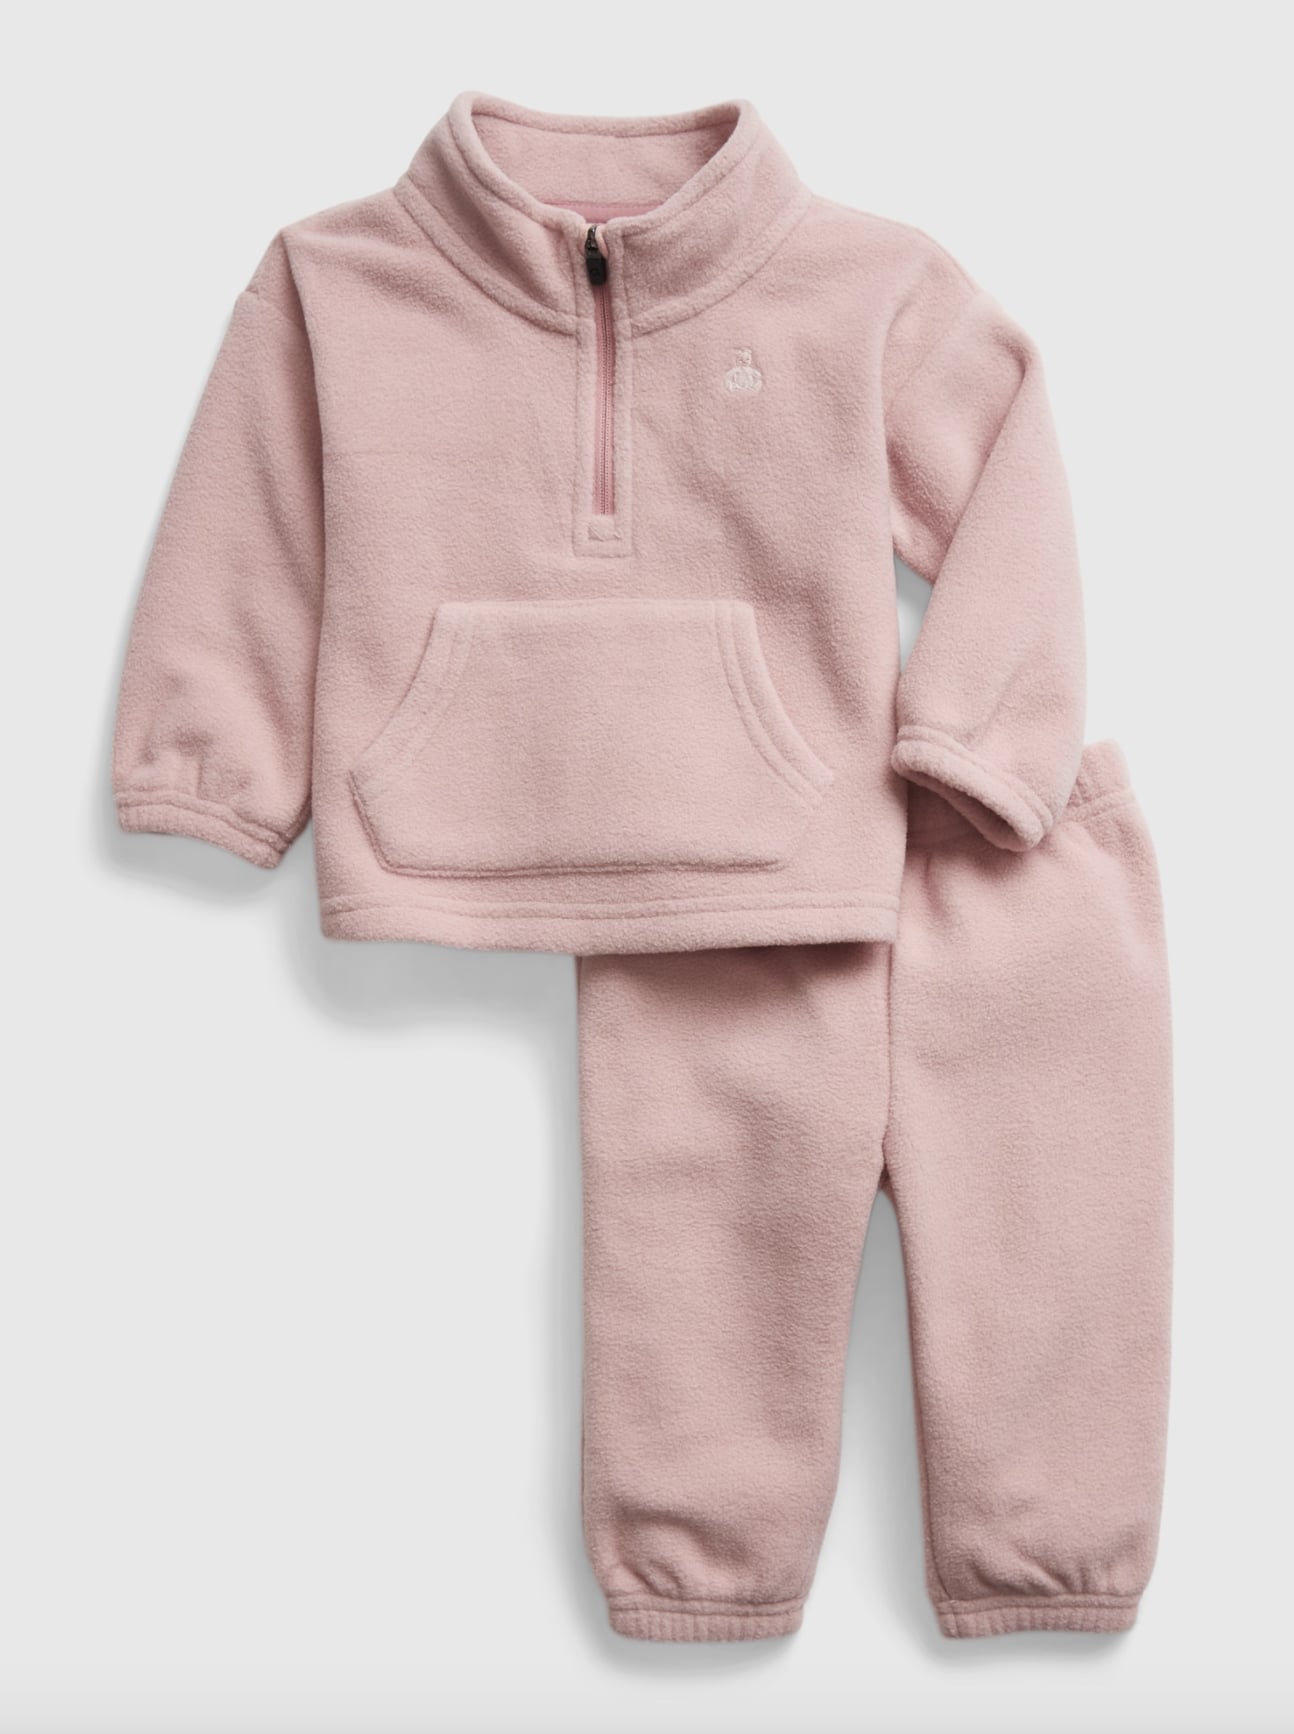 Gap Baby Fleece Outfit Set | Gifts We Love: Super-Cute Sets Super-Stylish Babies | Family Photo 5